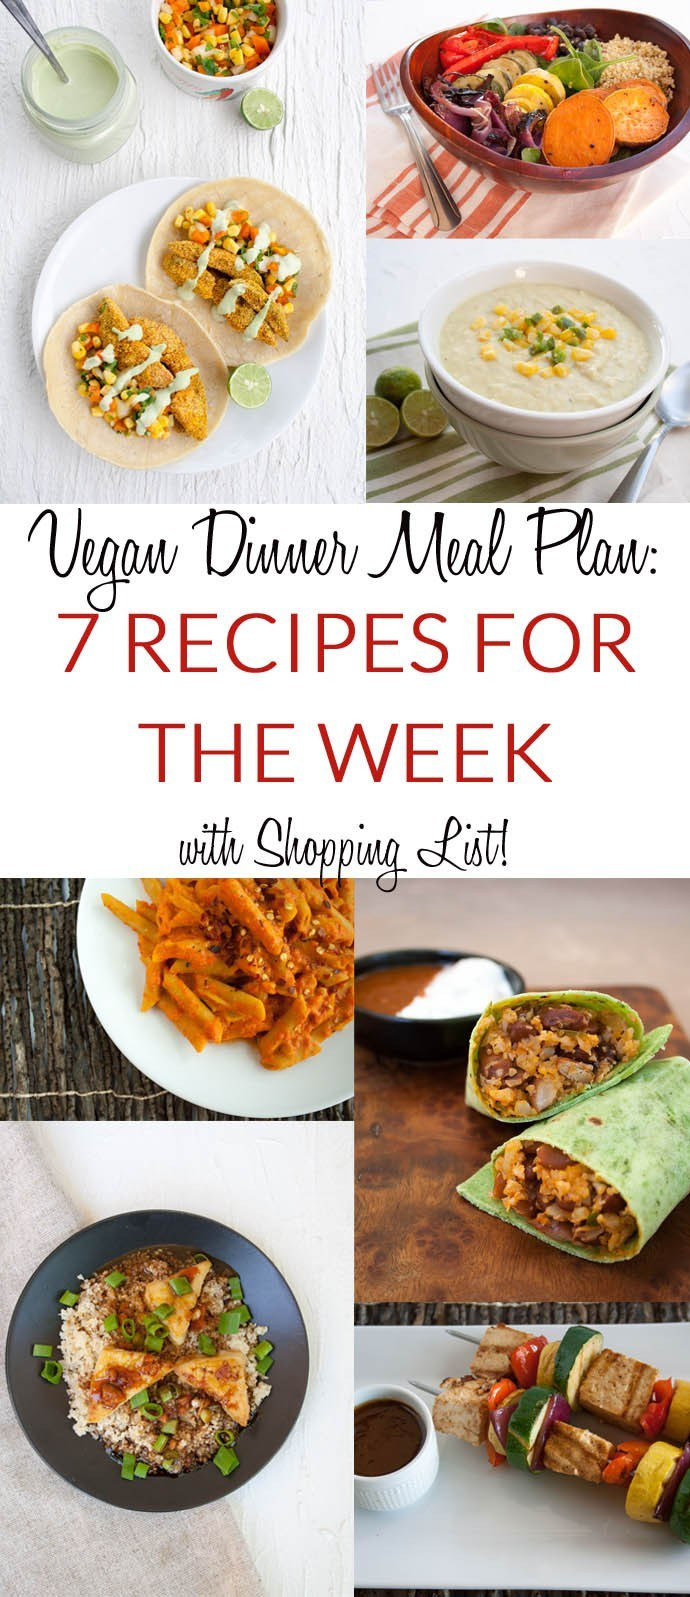 Vegan Dinner Recipes For Two
 Vegan Dinner Meal Plan 7 Recipes For the Week with